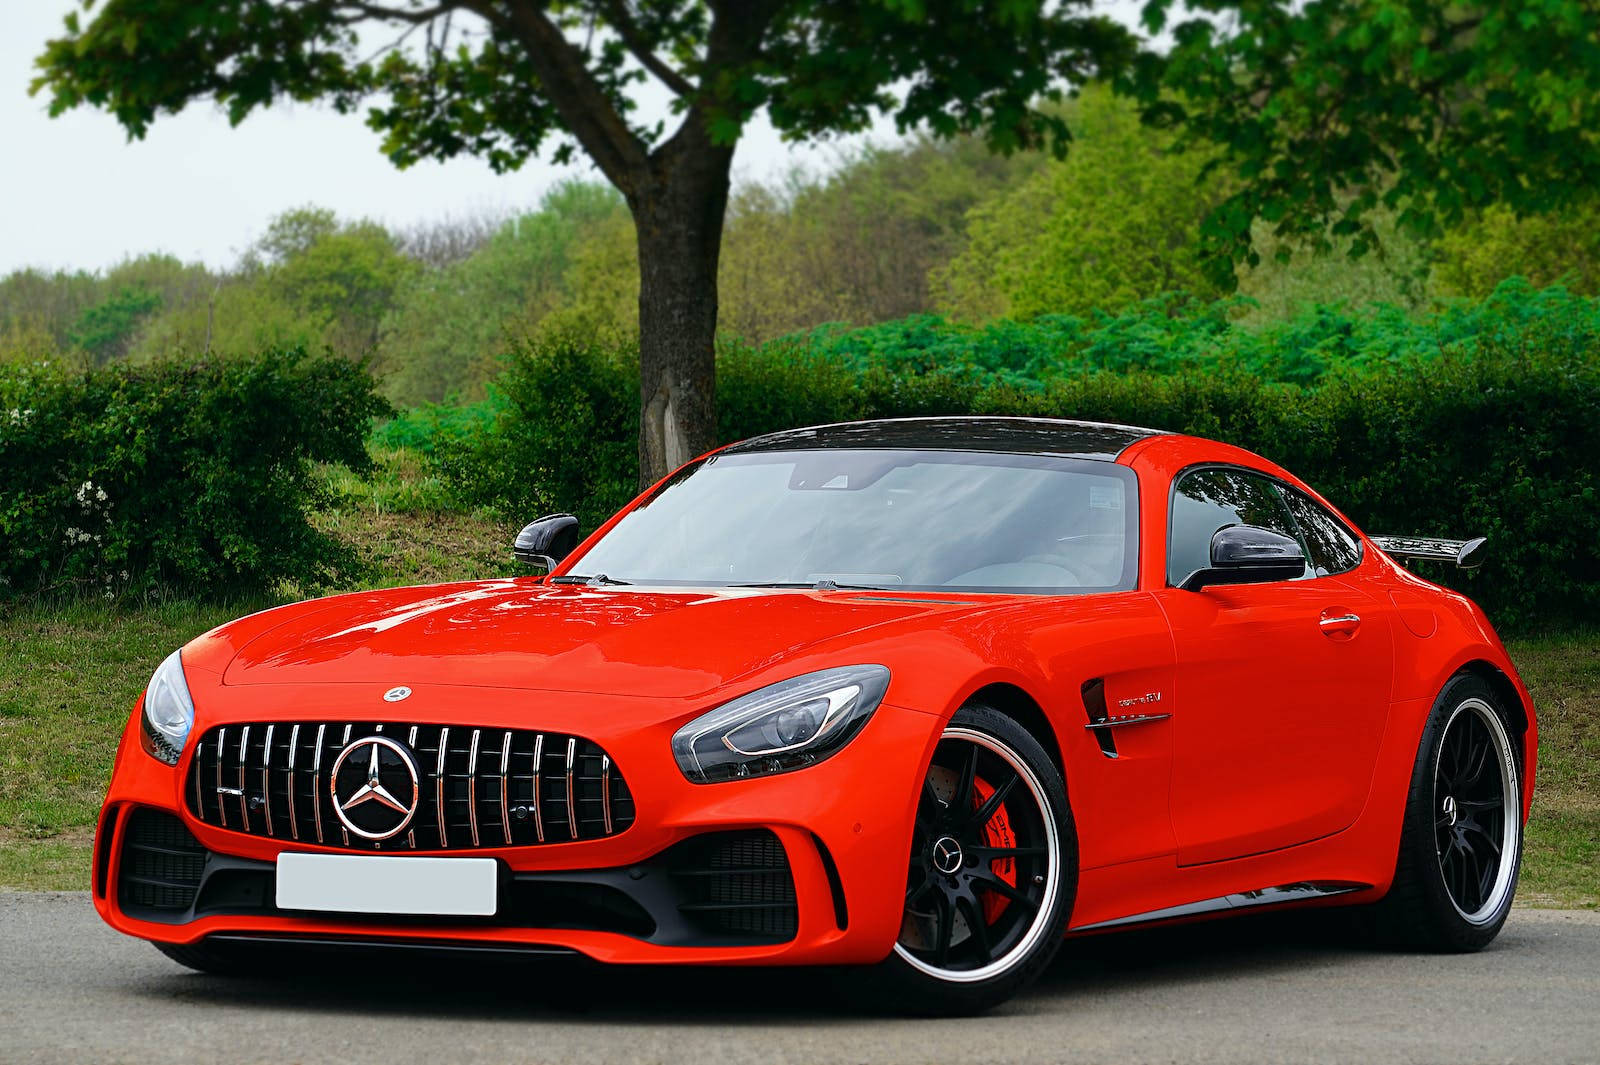 Showcasing Speed And Elegance: Red Mercedes-amg Gt Luxury Car Wallpaper